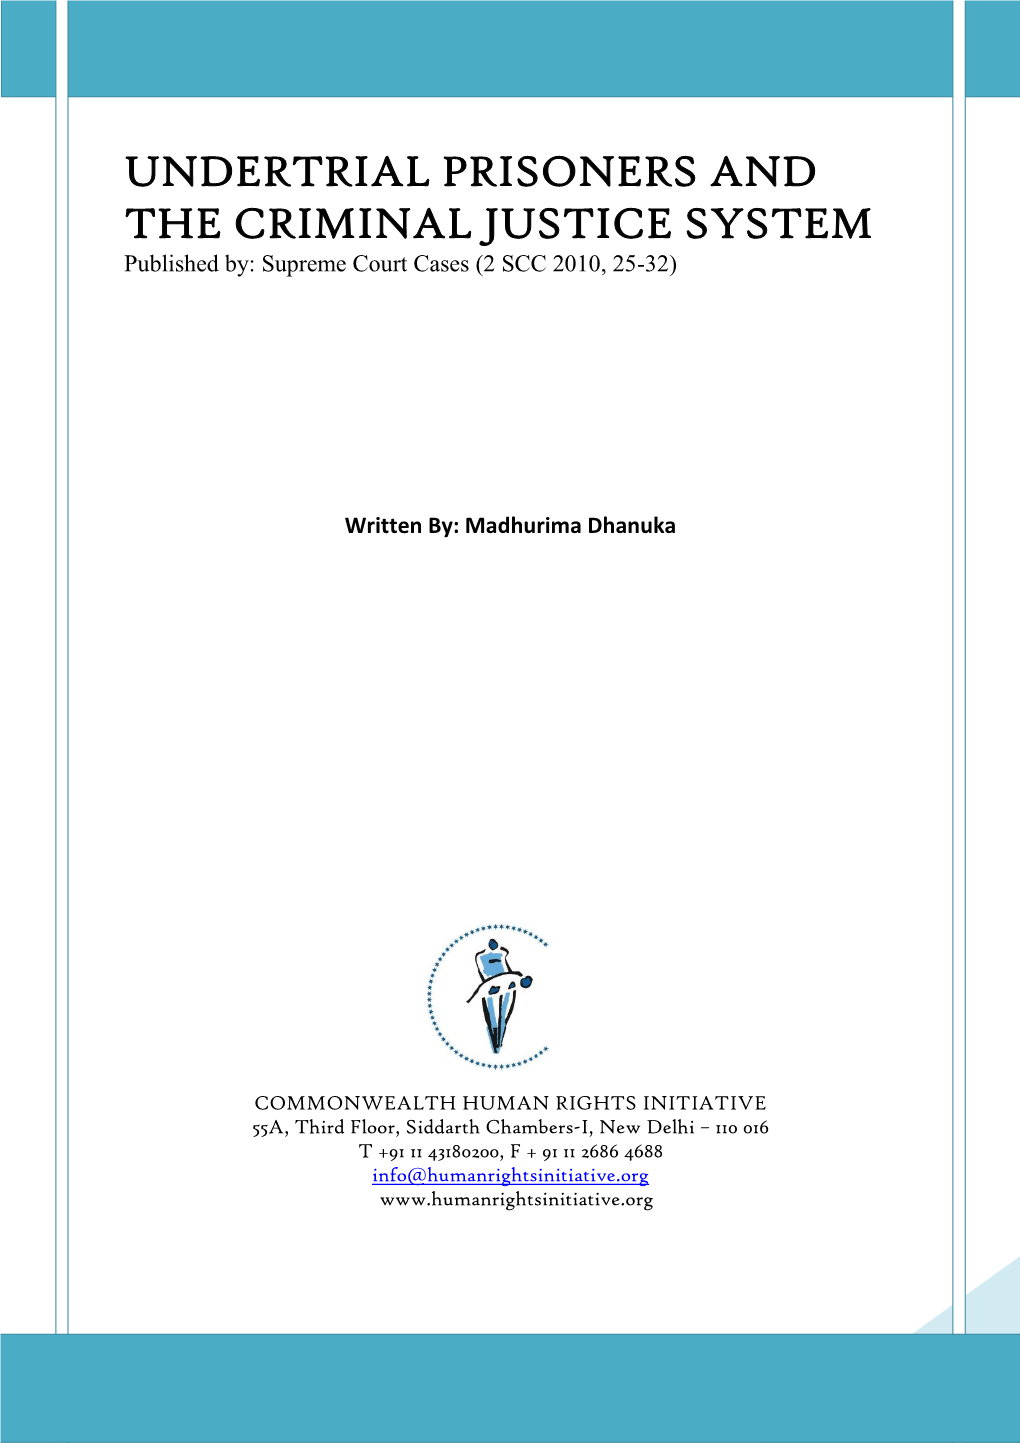 UNDERTRIAL PRISONERS and the CRIMINAL JUSTICE SYSTEM Published By: Supreme Court Cases (2 SCC 2010, 25-32)